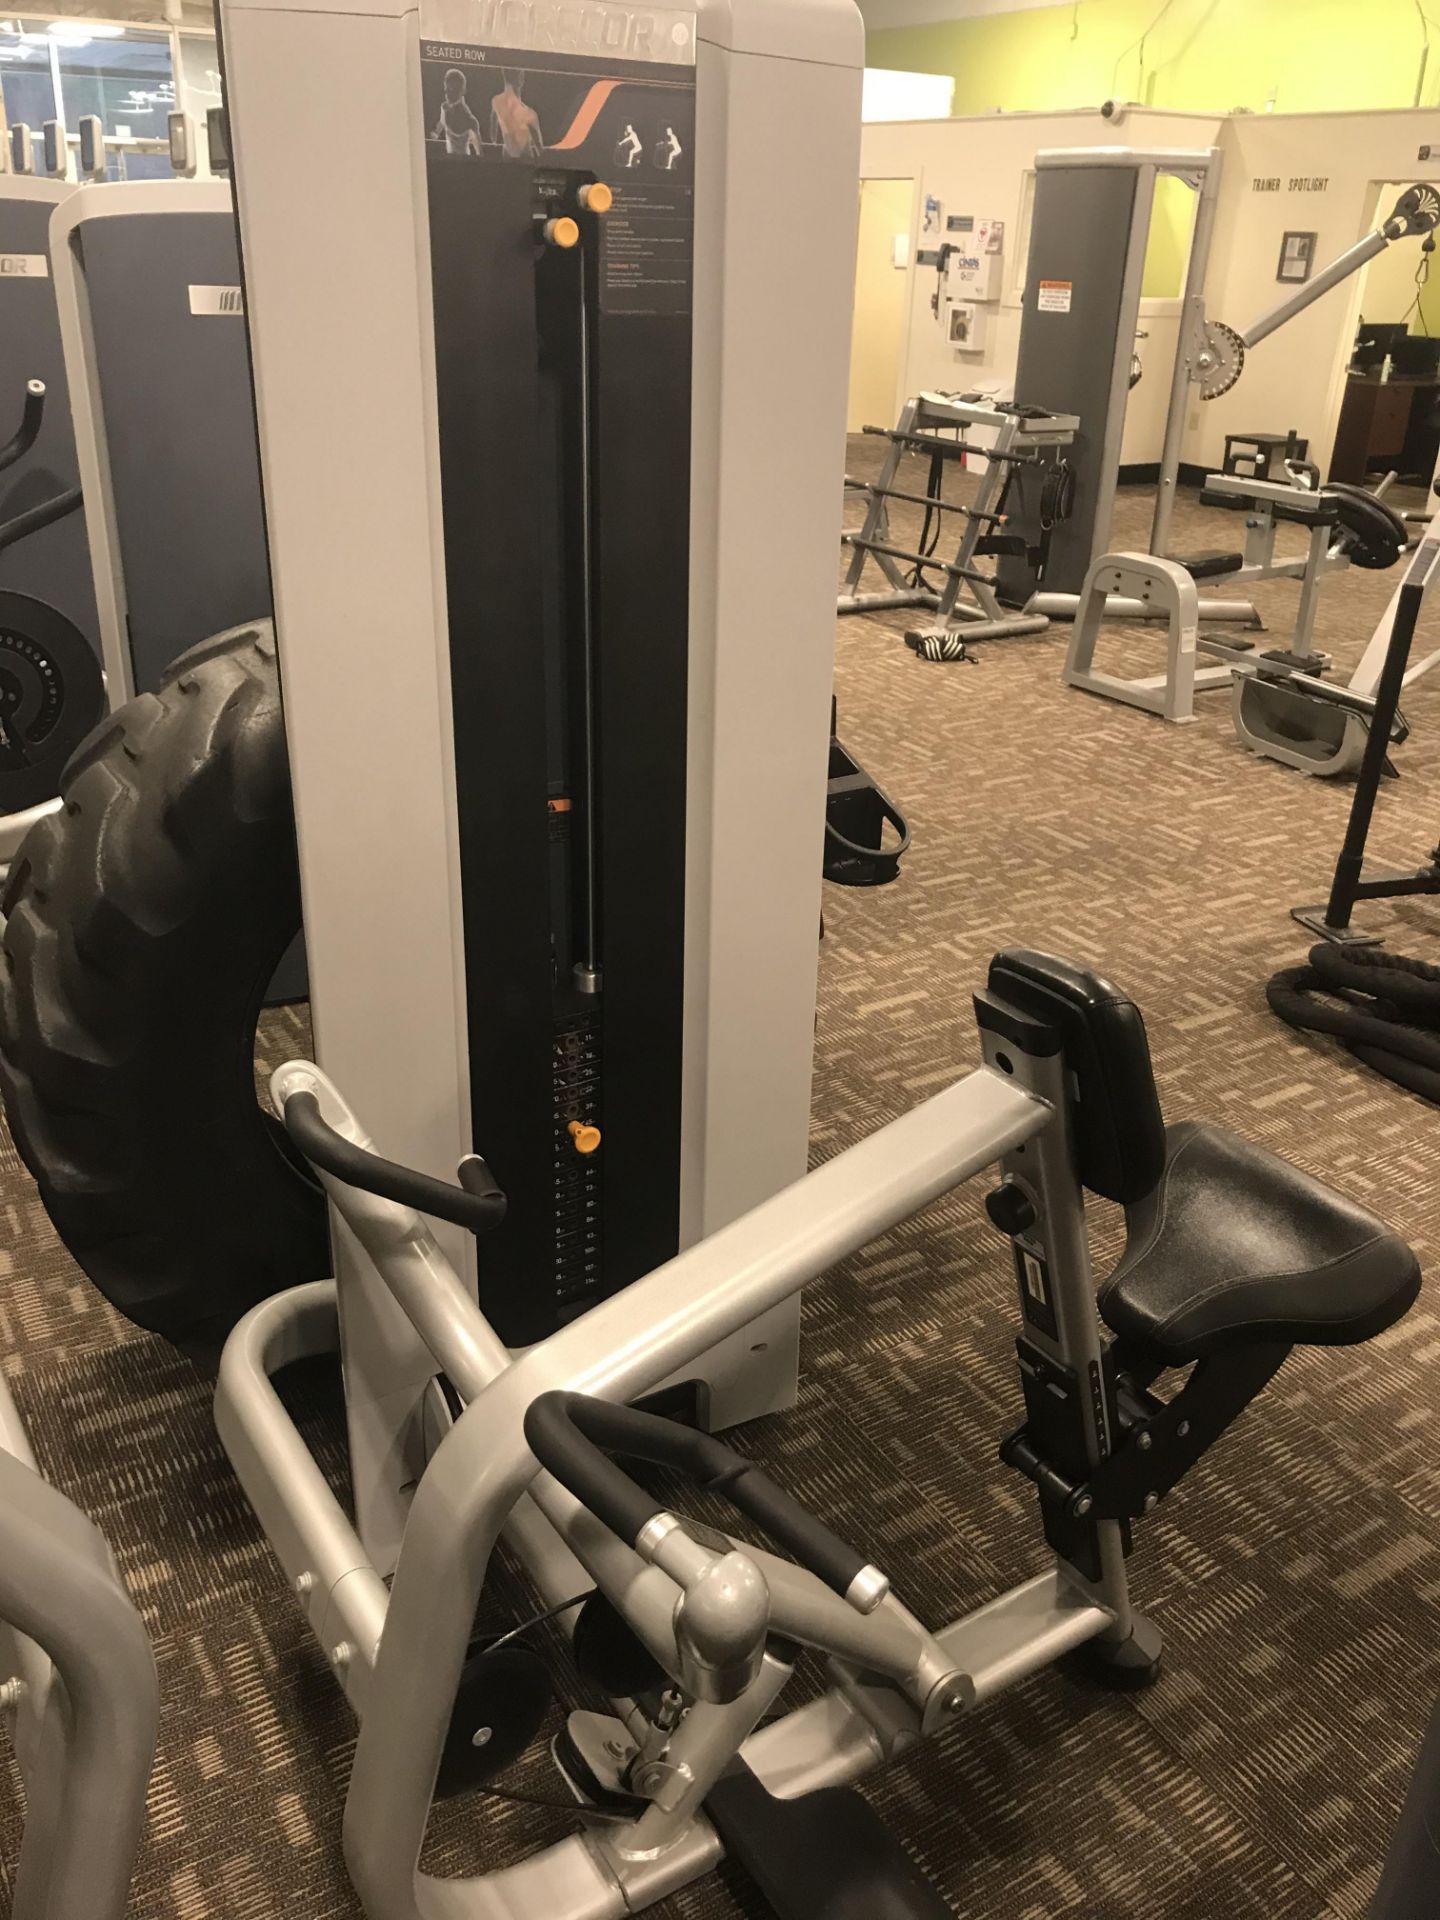 Precor C Line Seated Row #BWJMA15090001 w/250lb. Weight Stack & Adjustable Seat (WYOMING, RI - Image 2 of 3